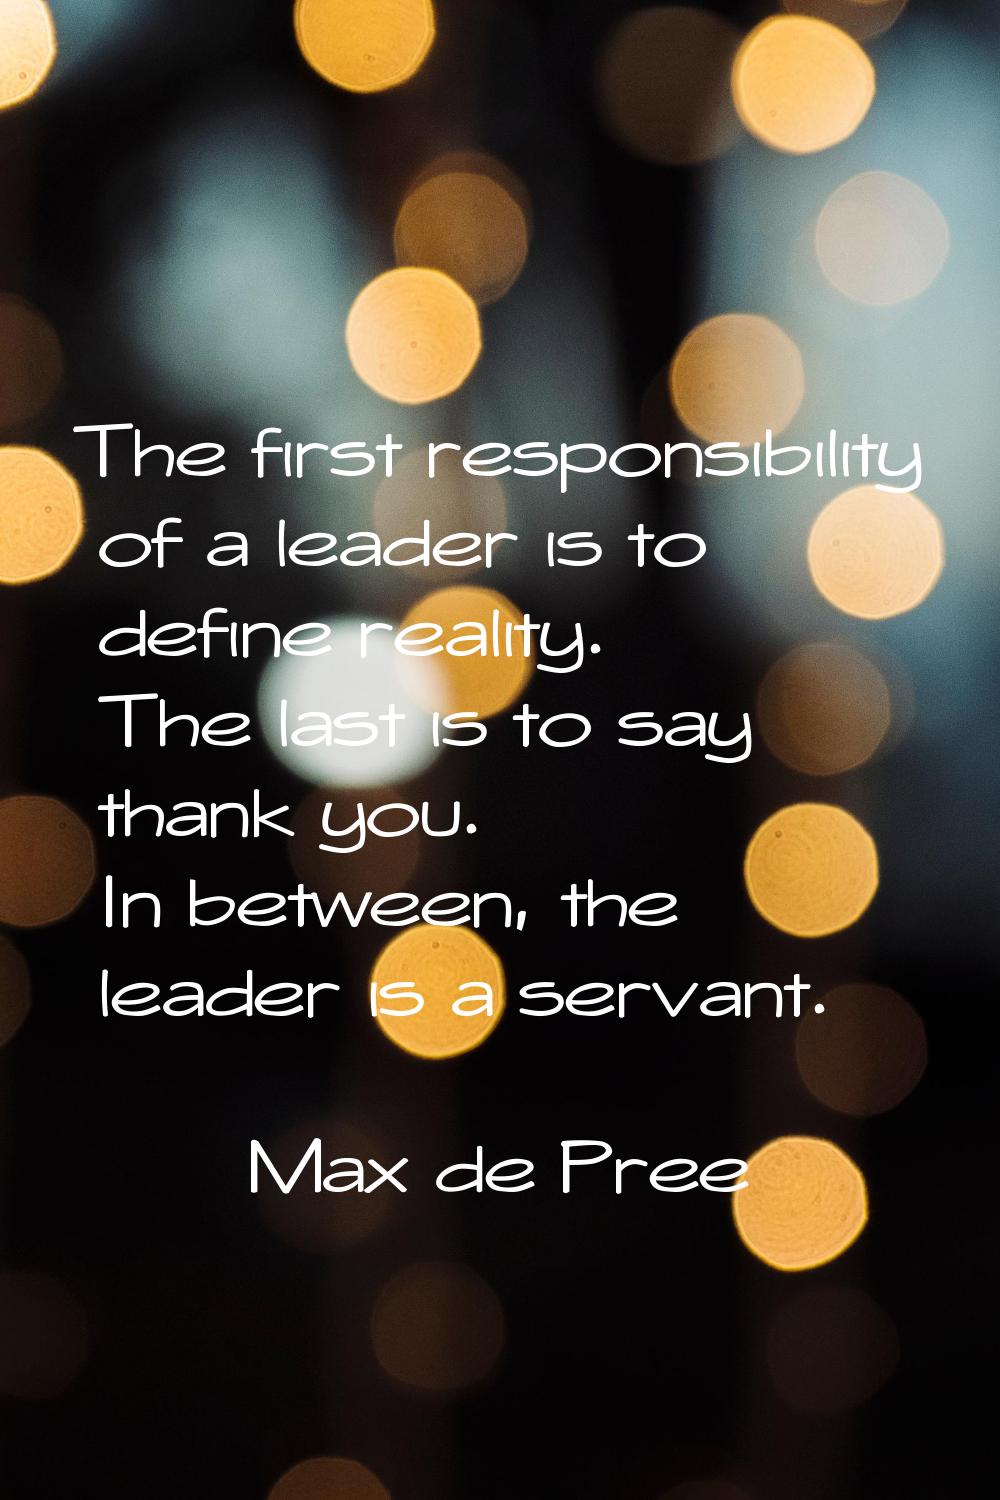 The first responsibility of a leader is to define reality. The last is to say thank you. In between